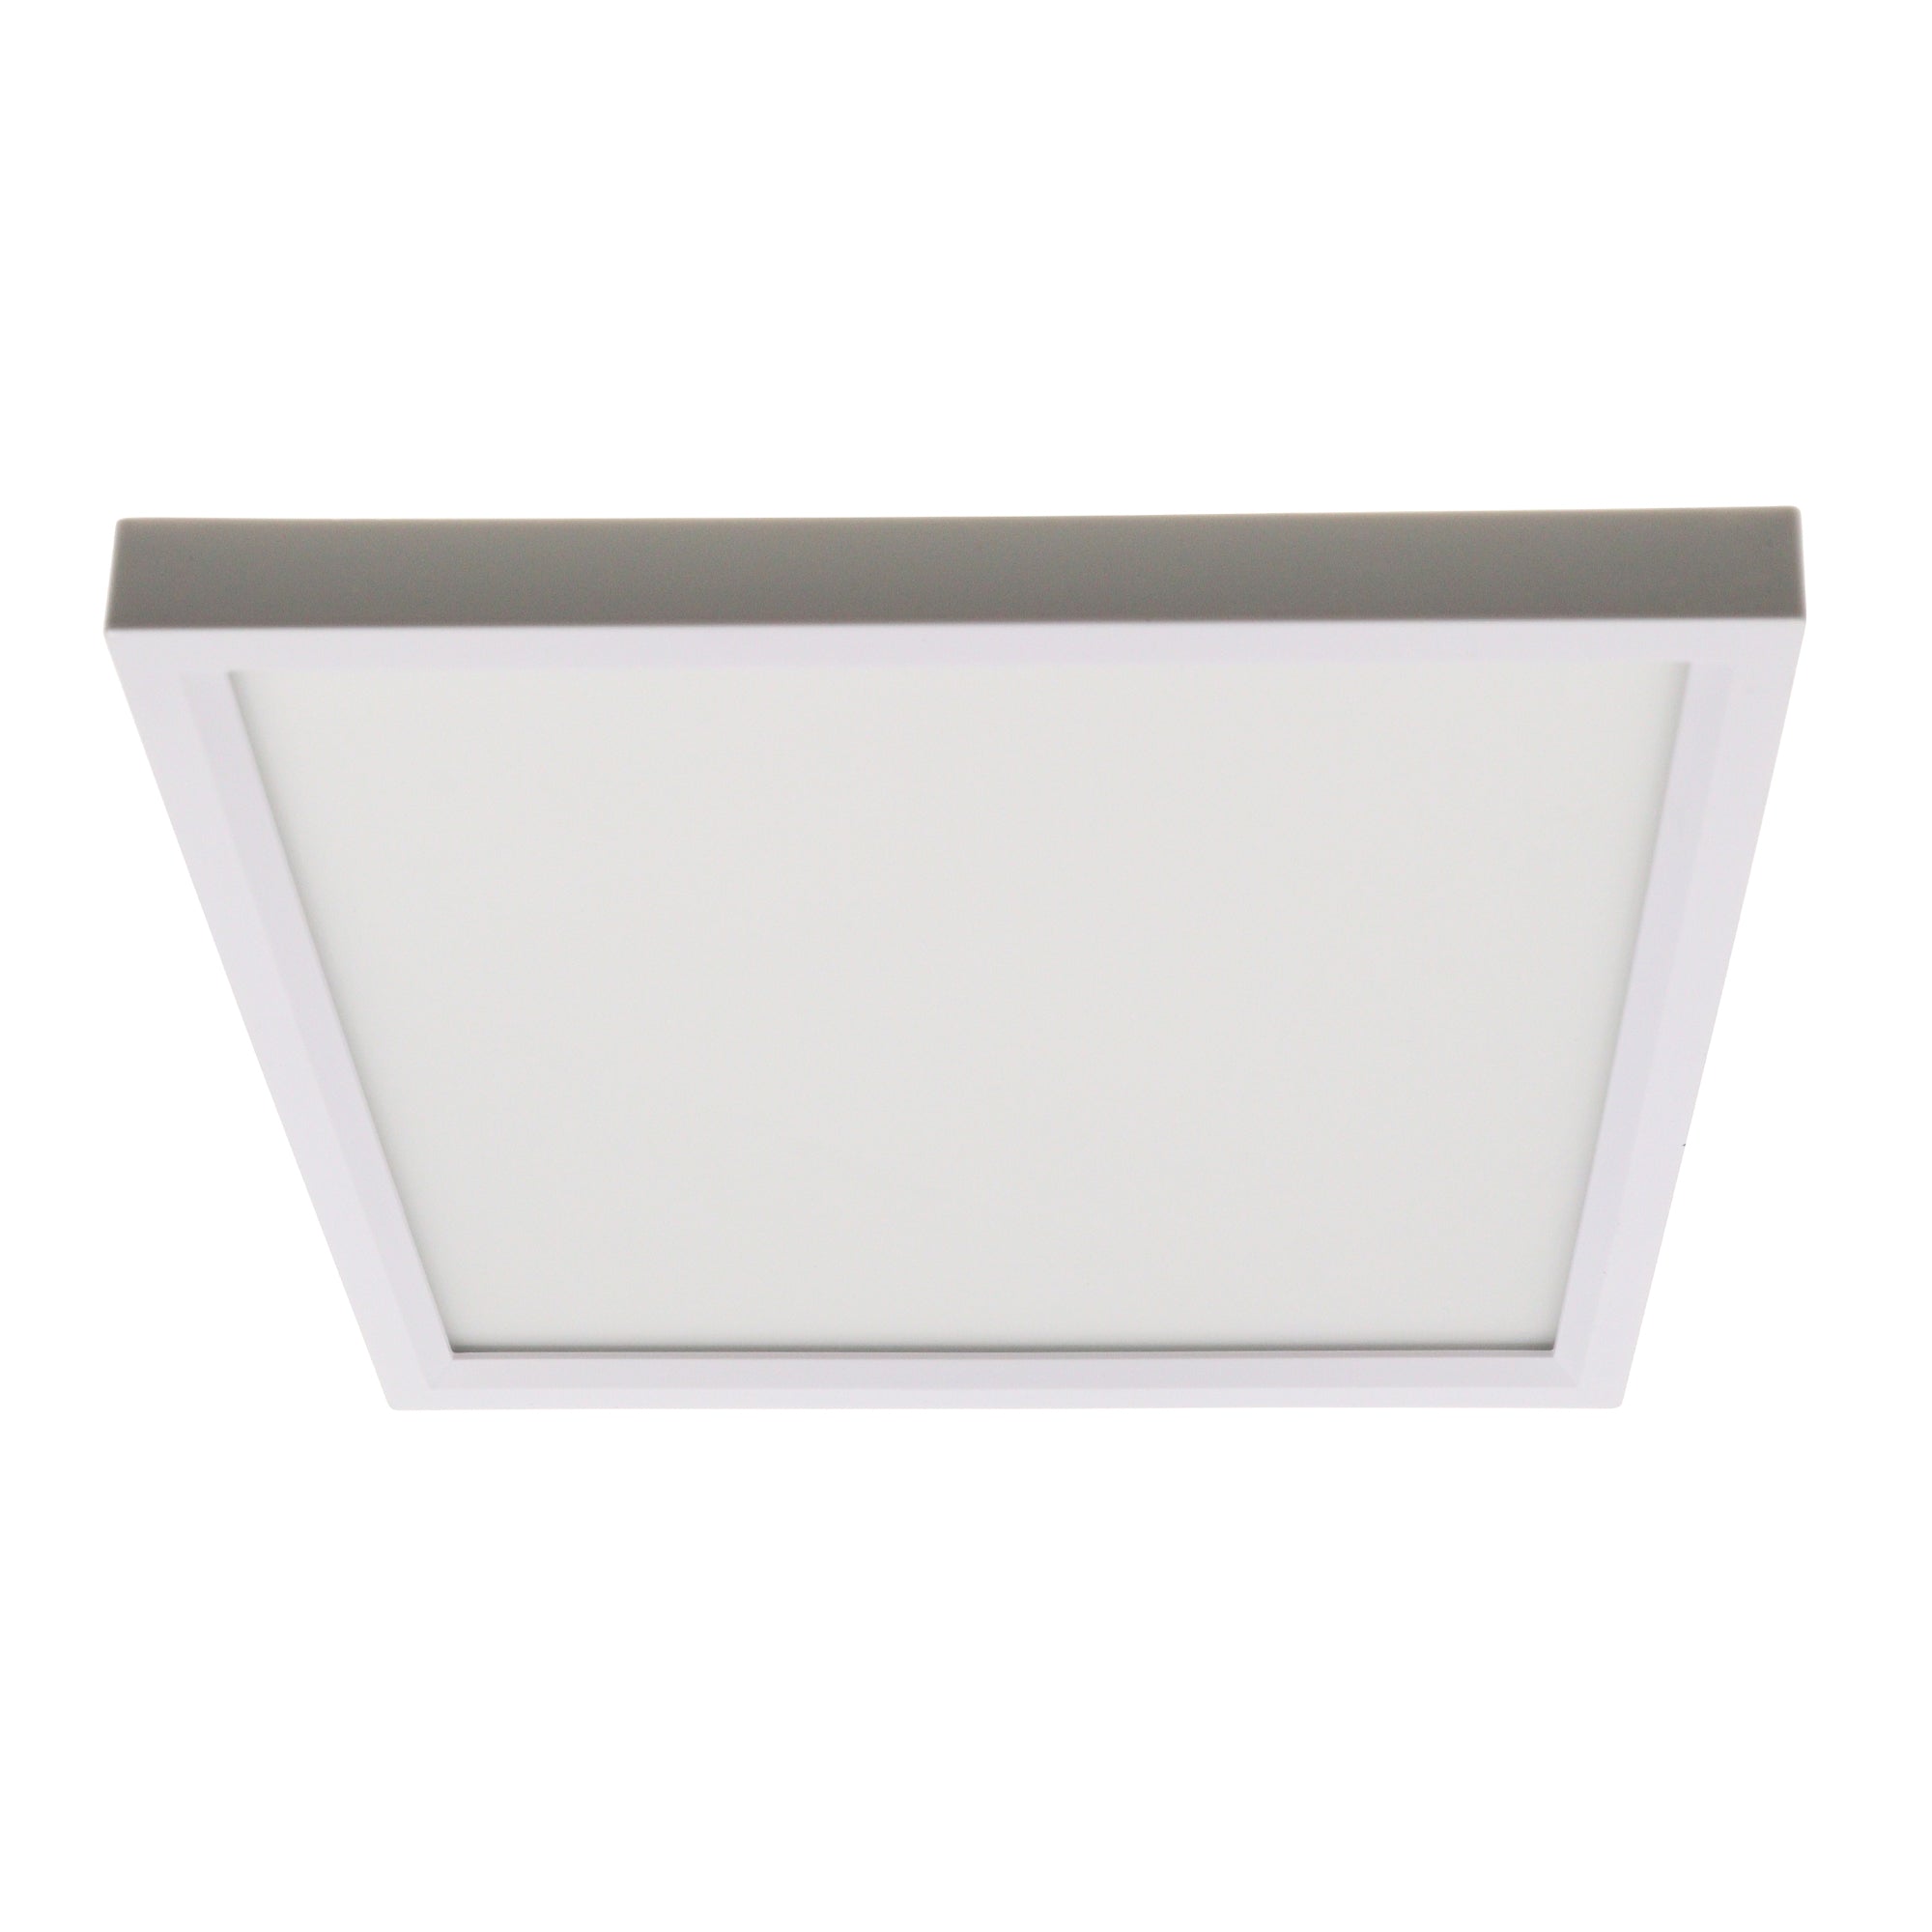 Generic, Cireneg 93029327 SQUARE SURFACE MOUNT LED LIGHT, DIMMABLE, 15W, 35K, 7.5", WHITE